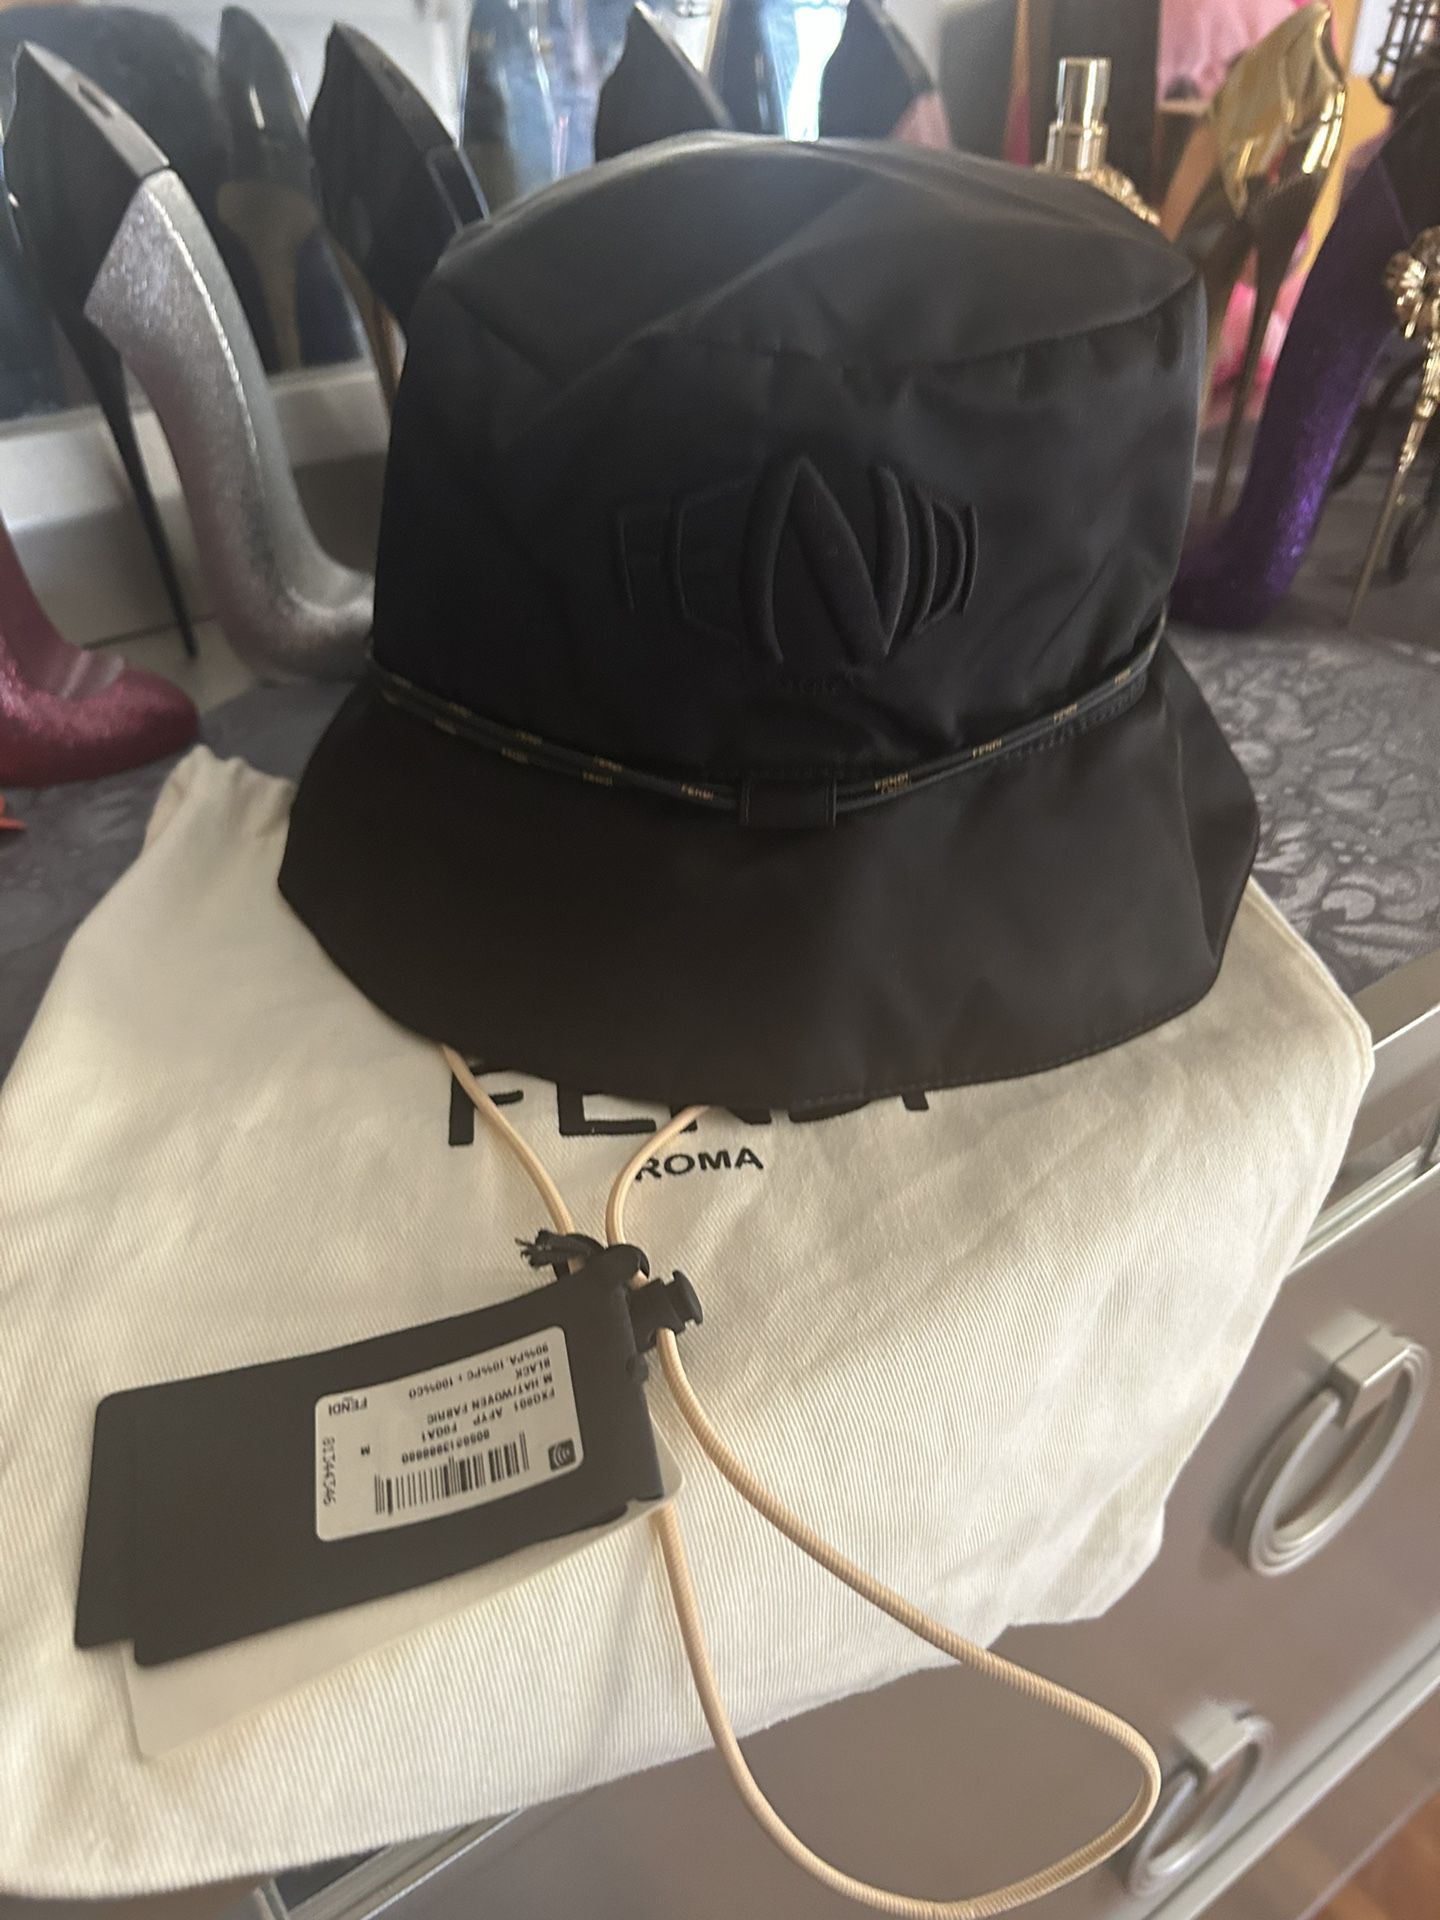 Fendi Motiff Bucket Drawstring Hat - New With Tags, Dustbag And Fendi Store Bag!